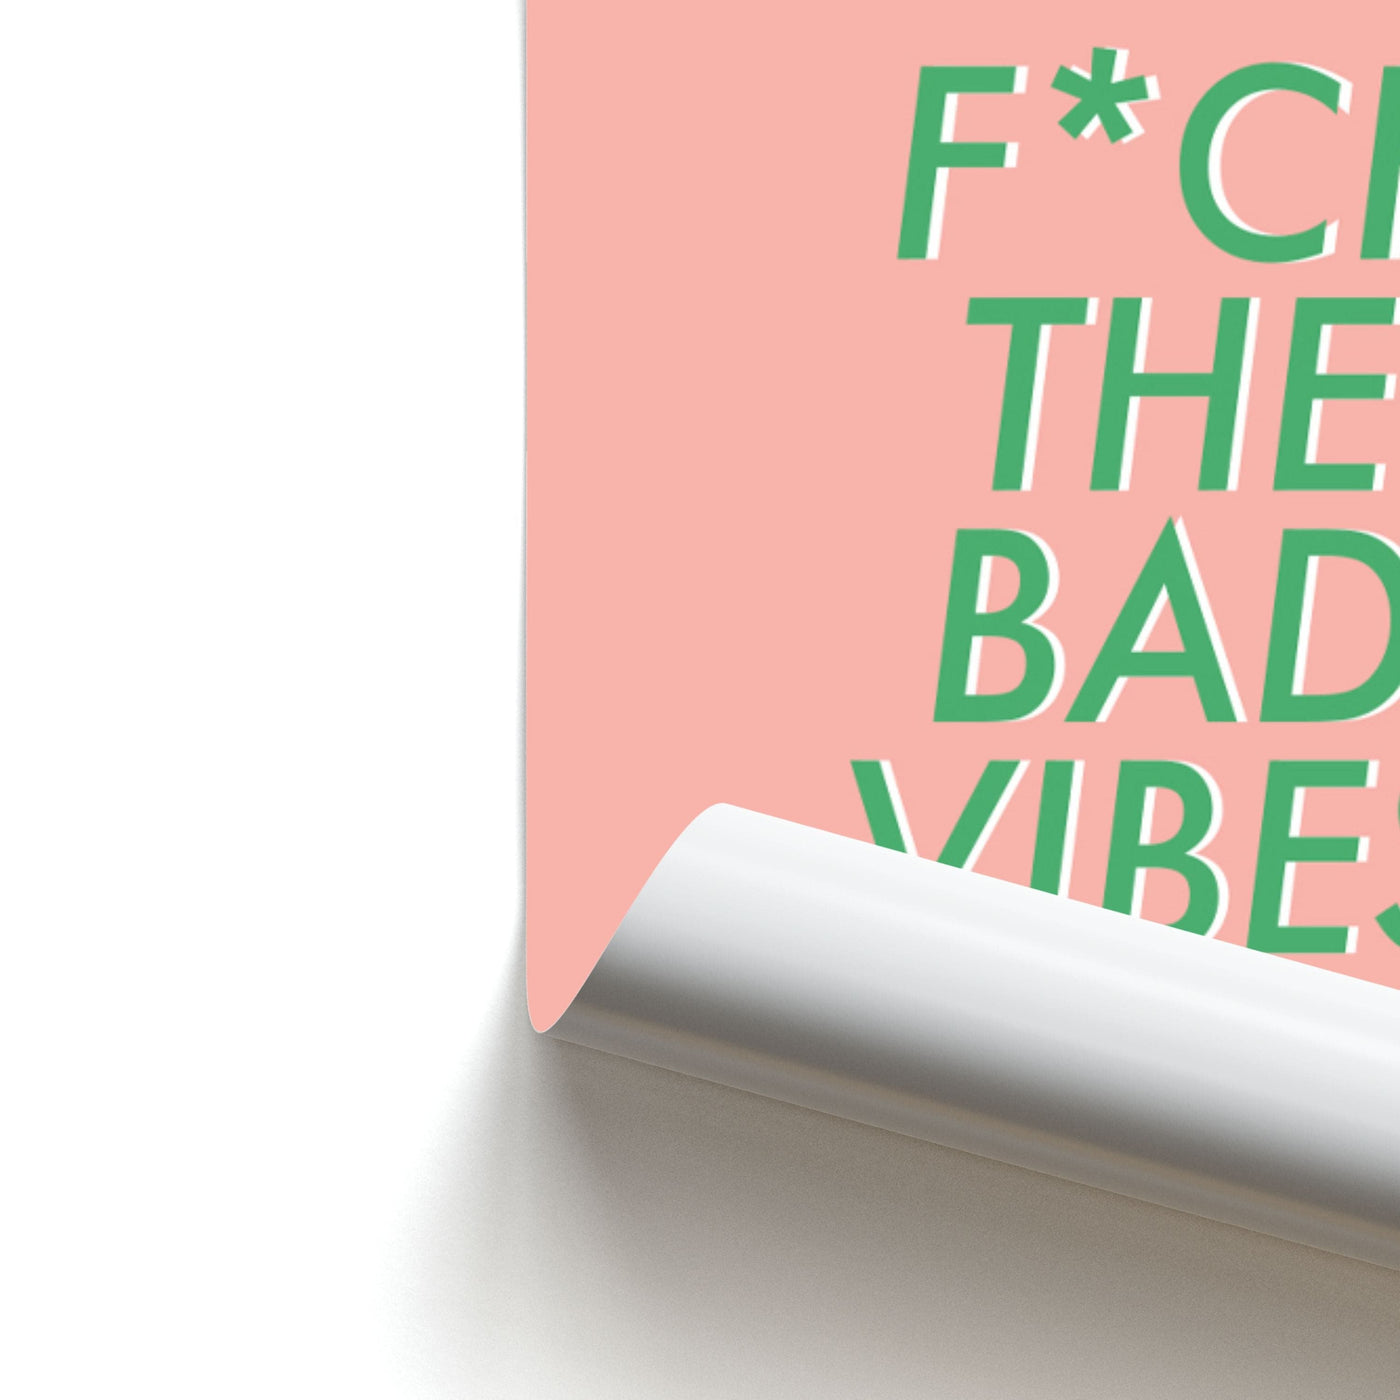 The Bad Vibes - Sassy Quotes Poster